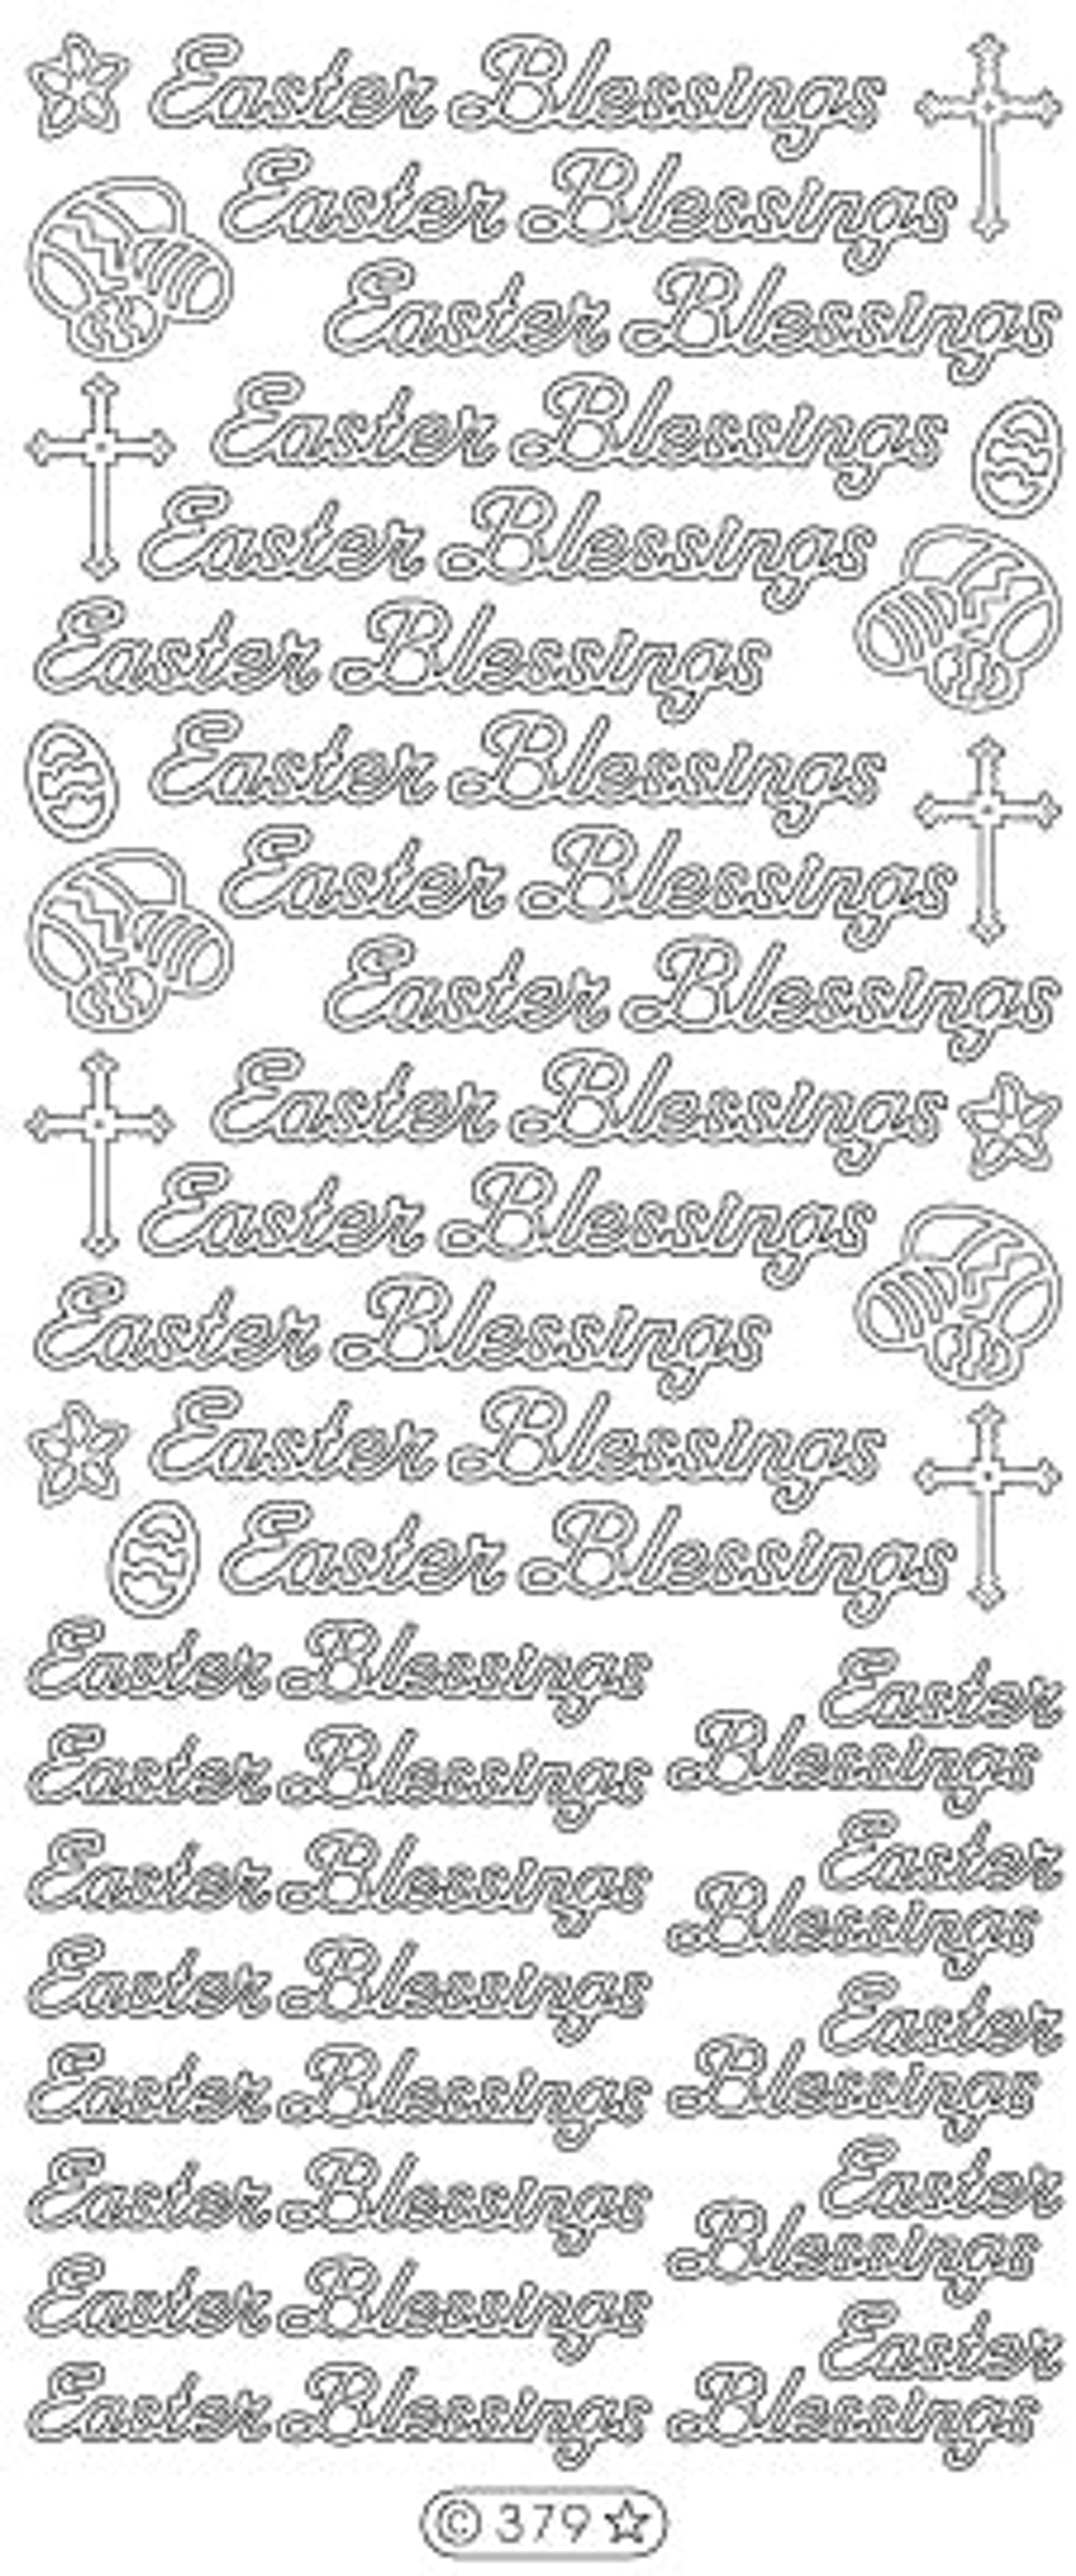 Deco Stickers - Deco Stickers Easter Blessings